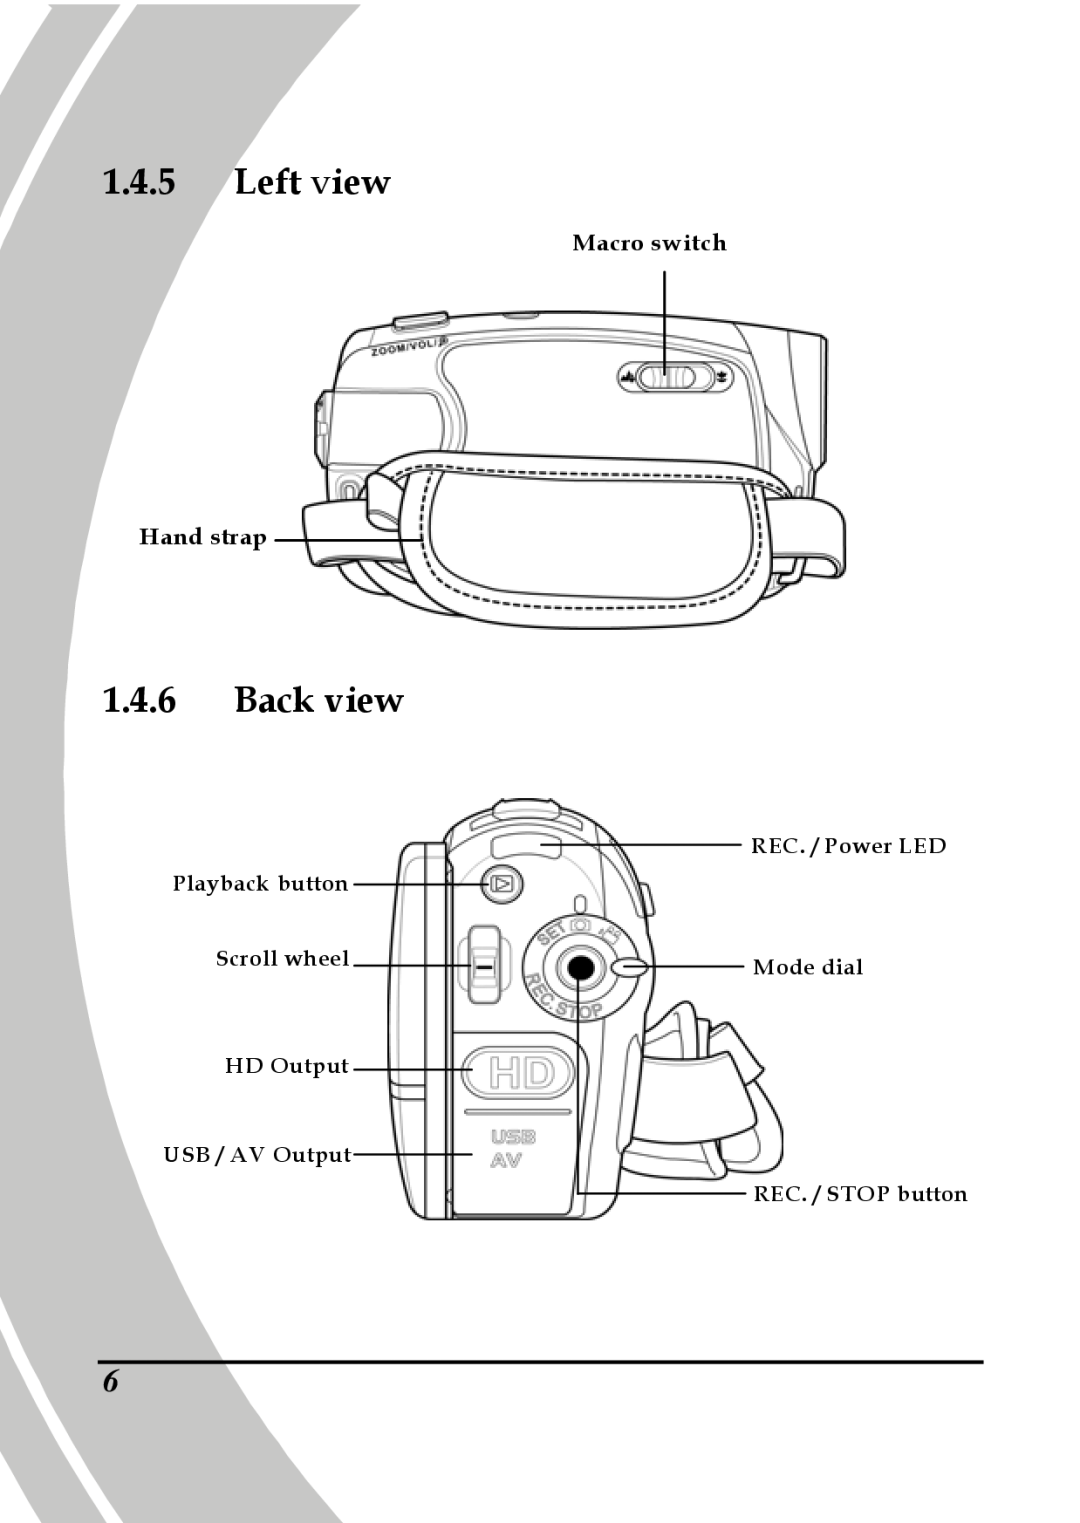 DXG Technology DXG-517V HD Left view, Back view, Hand strap, Macro switch, REC. / Power LED Mode dial REC. / STOP button 